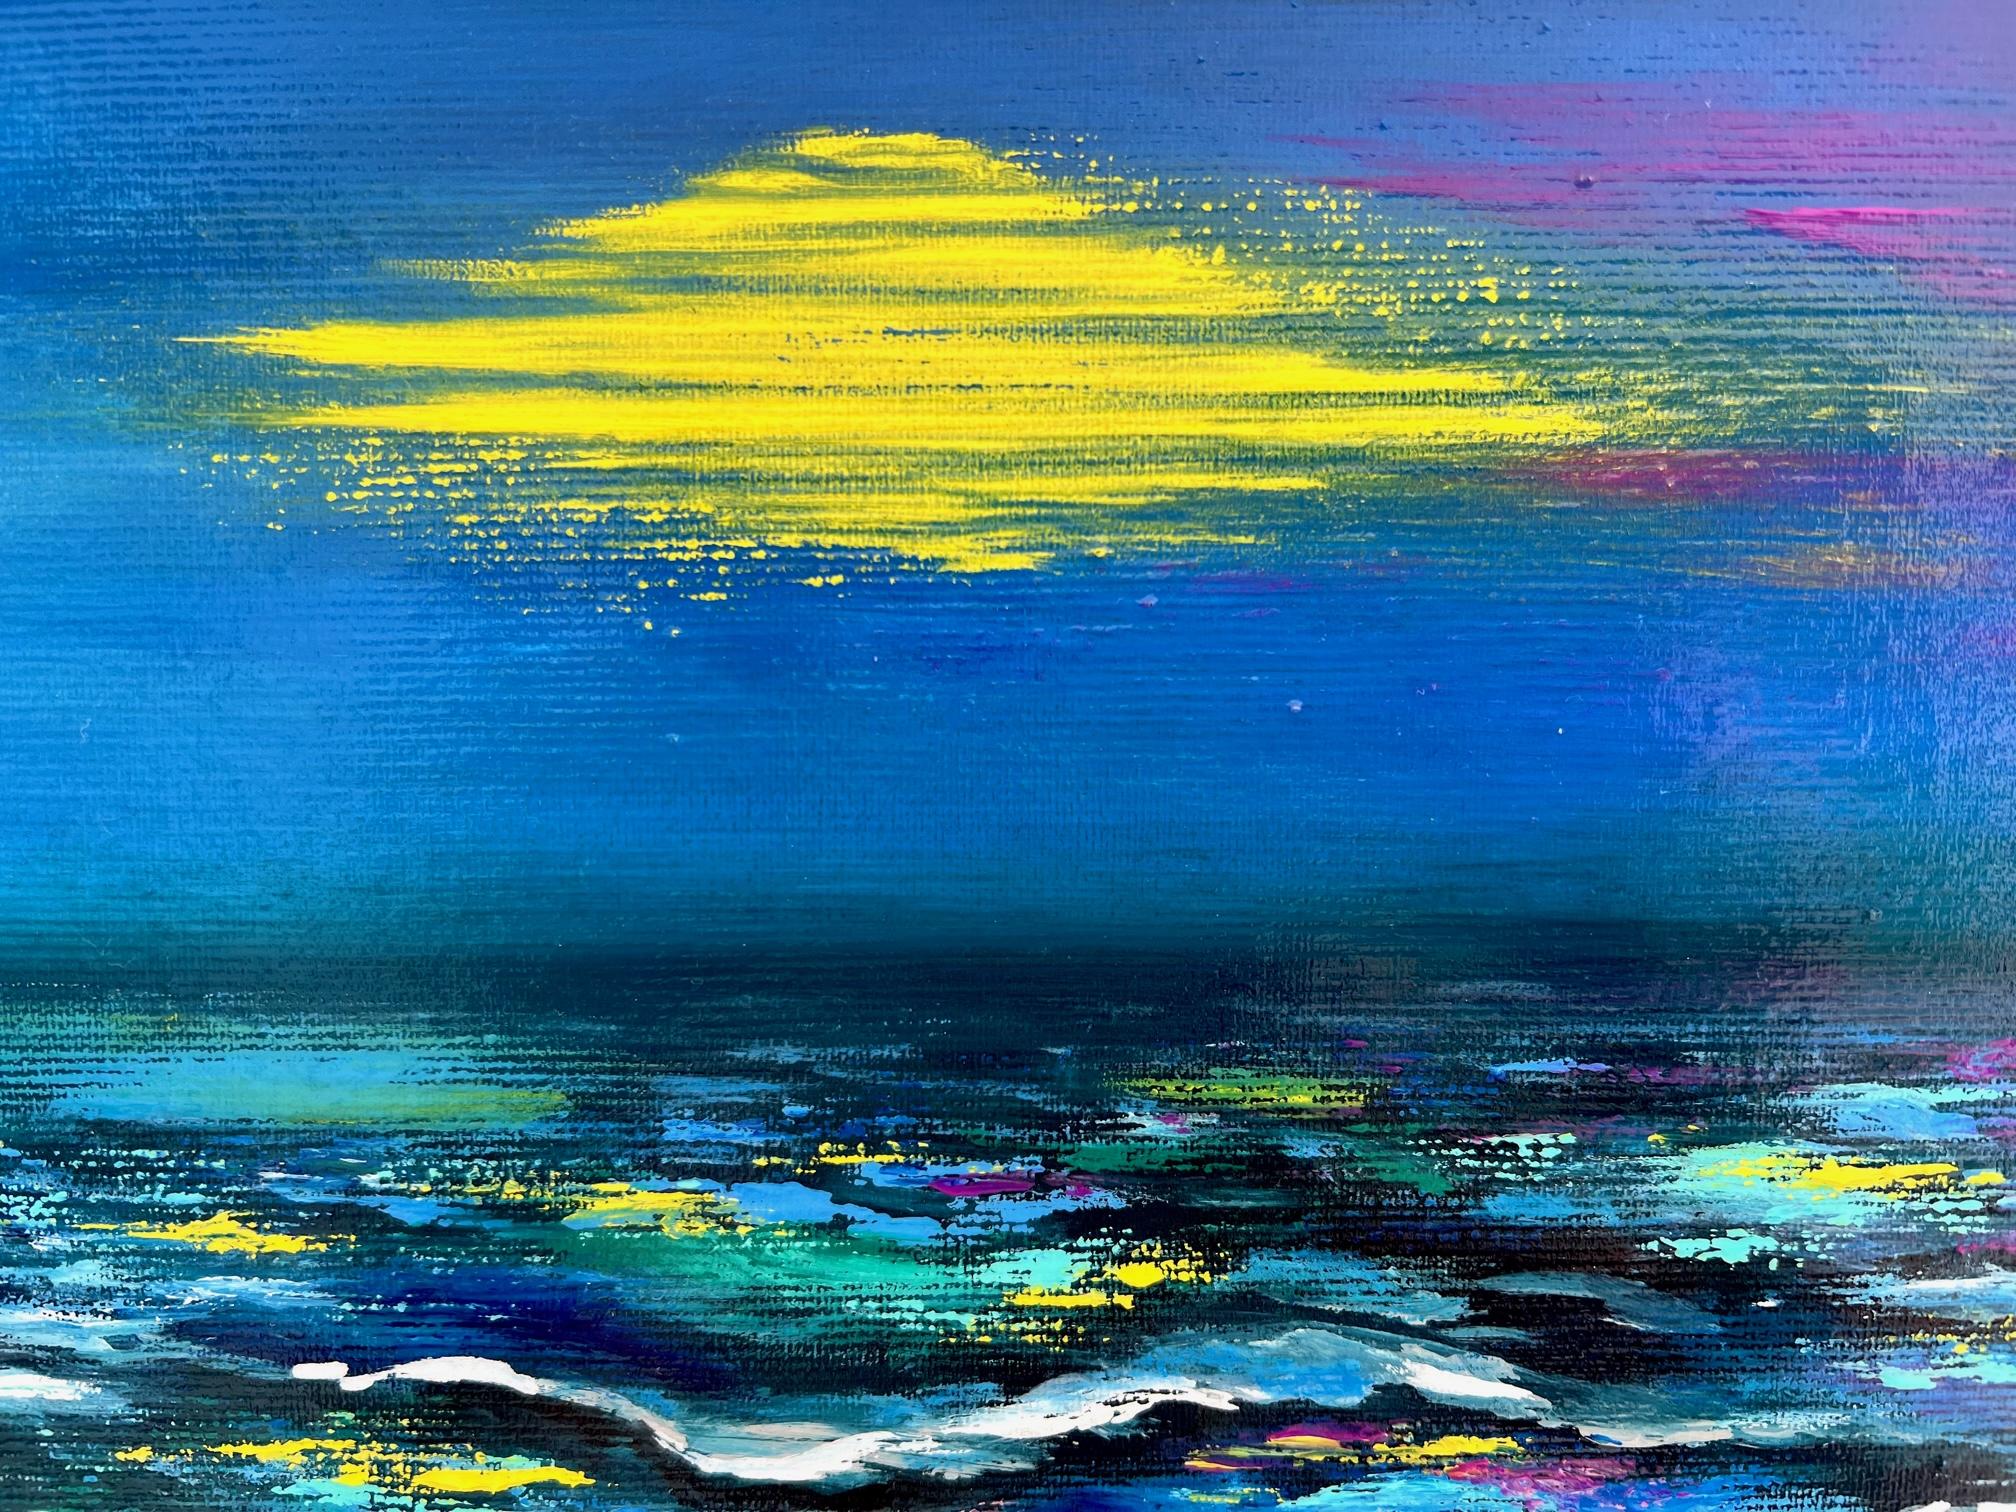  Peaceful Evening. Oil painting, Impressionist style. Sea / Waves / Water/ Moon. 2